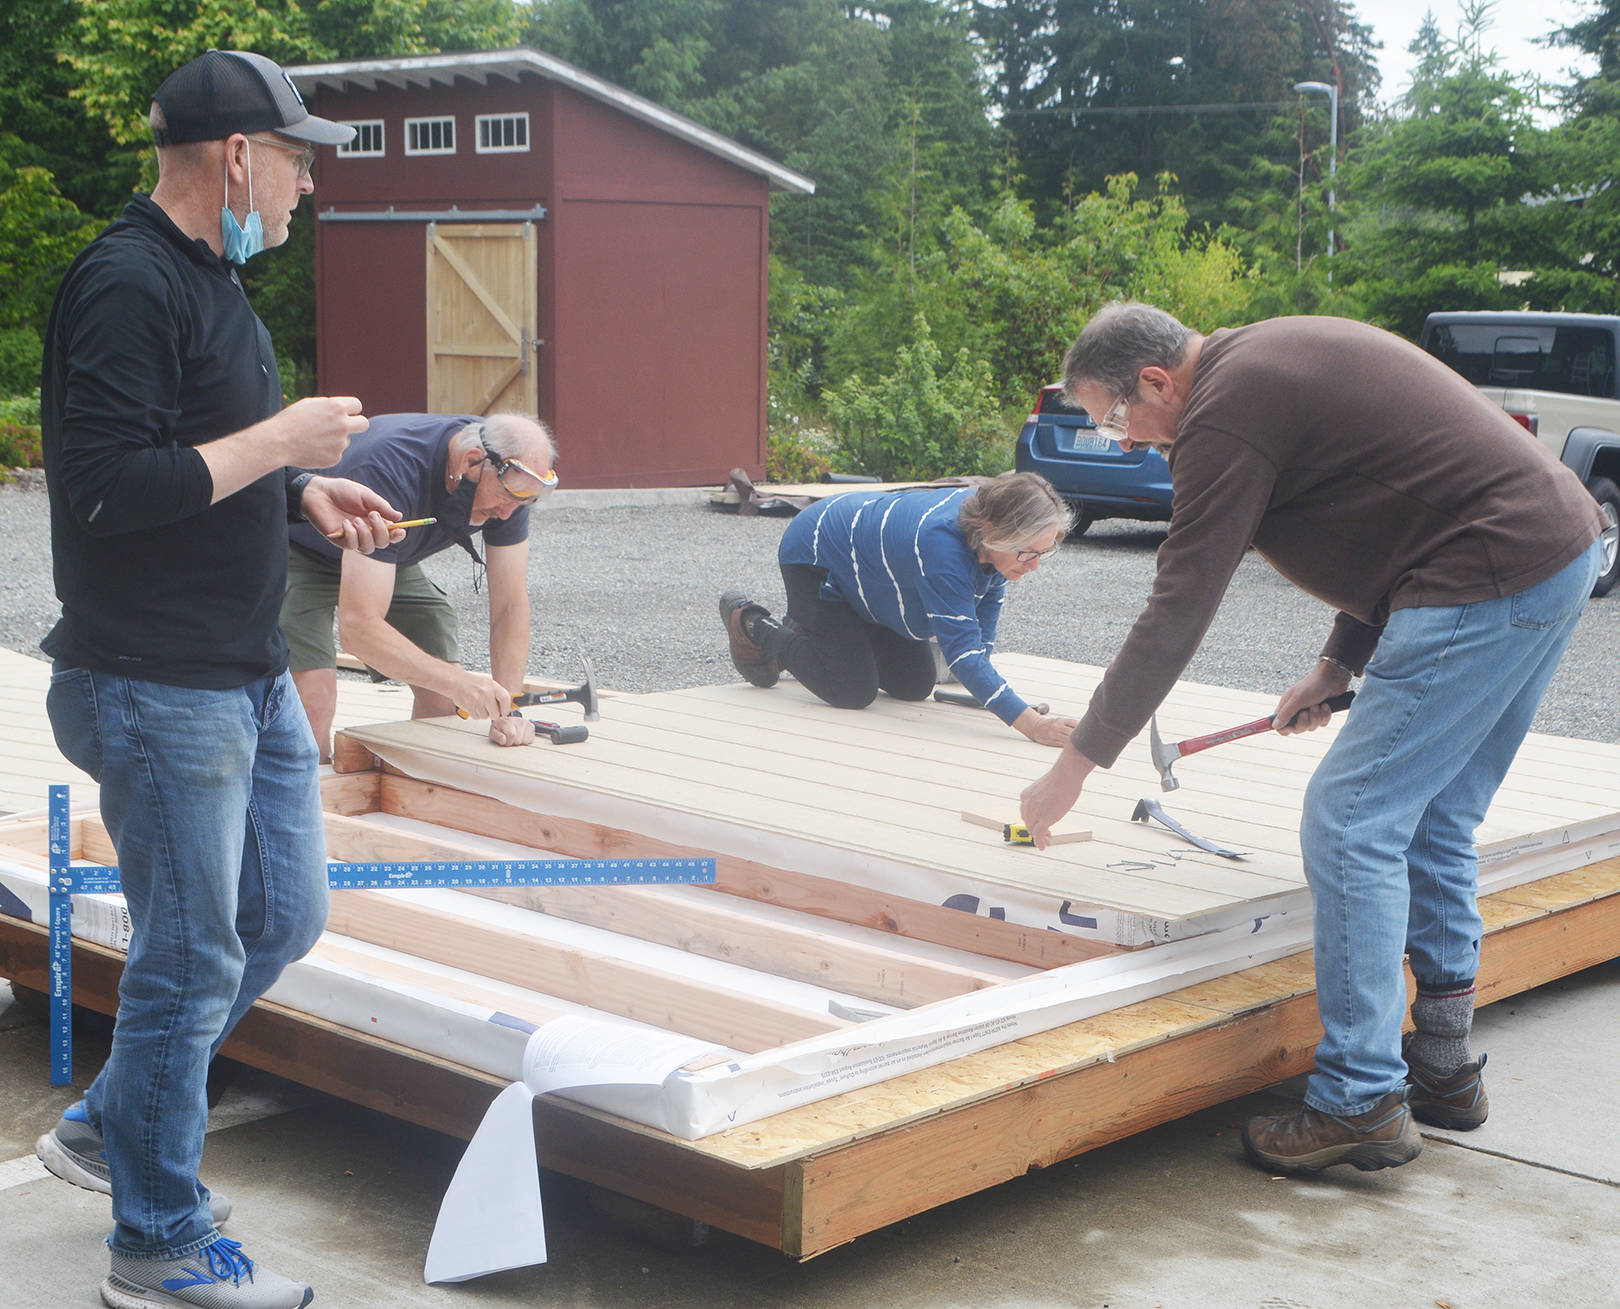 Volunteers nail siding onto the frame of one of the walls of the tiny house.